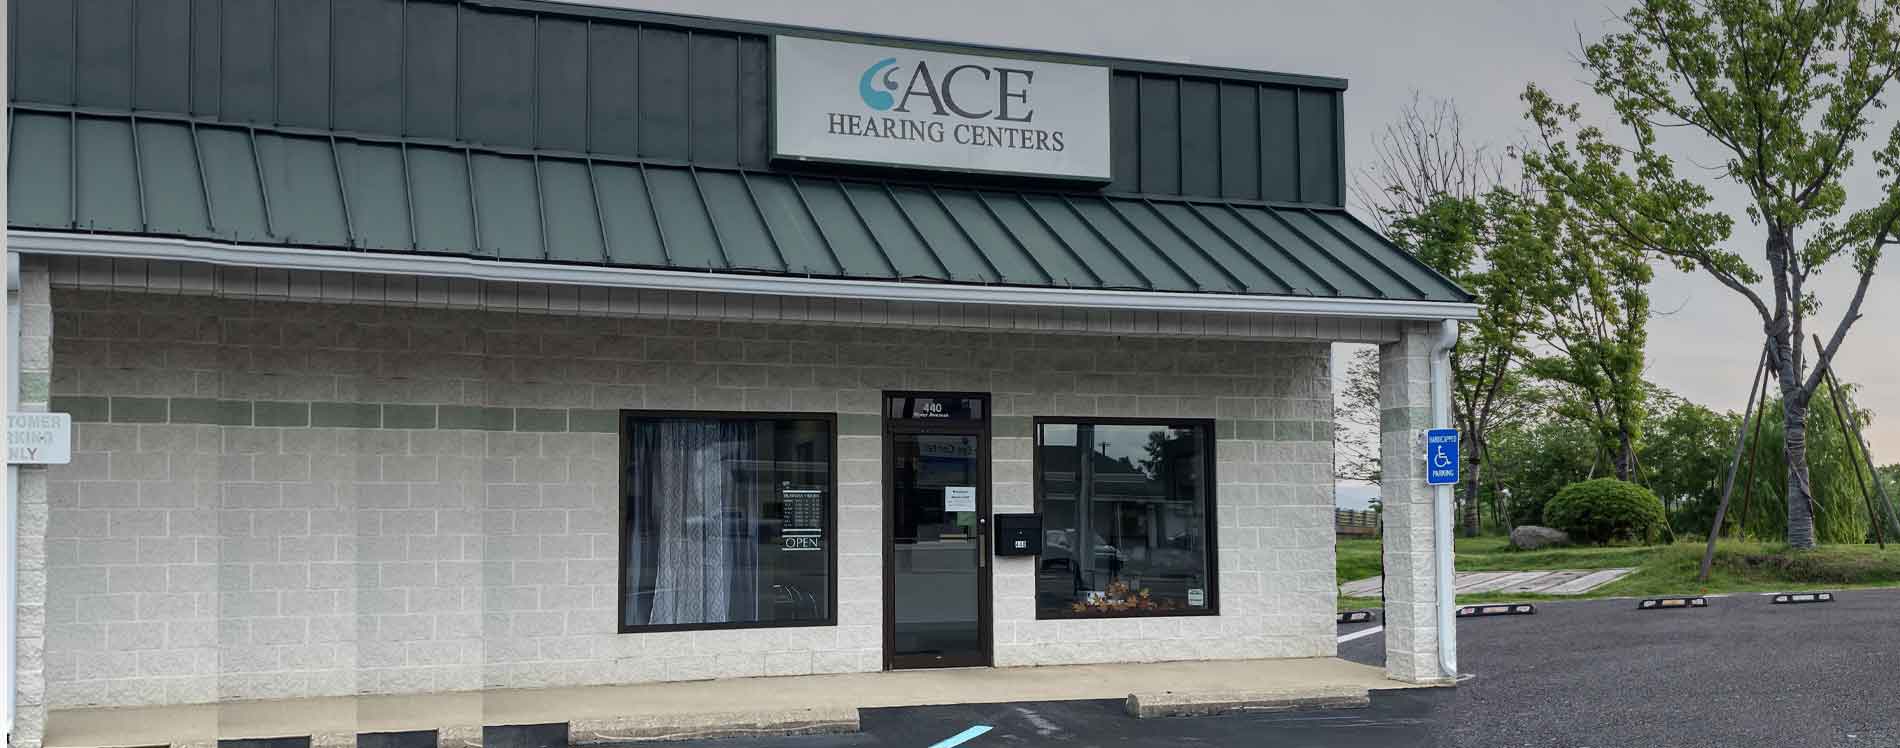 Ace Hearing Centers, Williamsport, PA